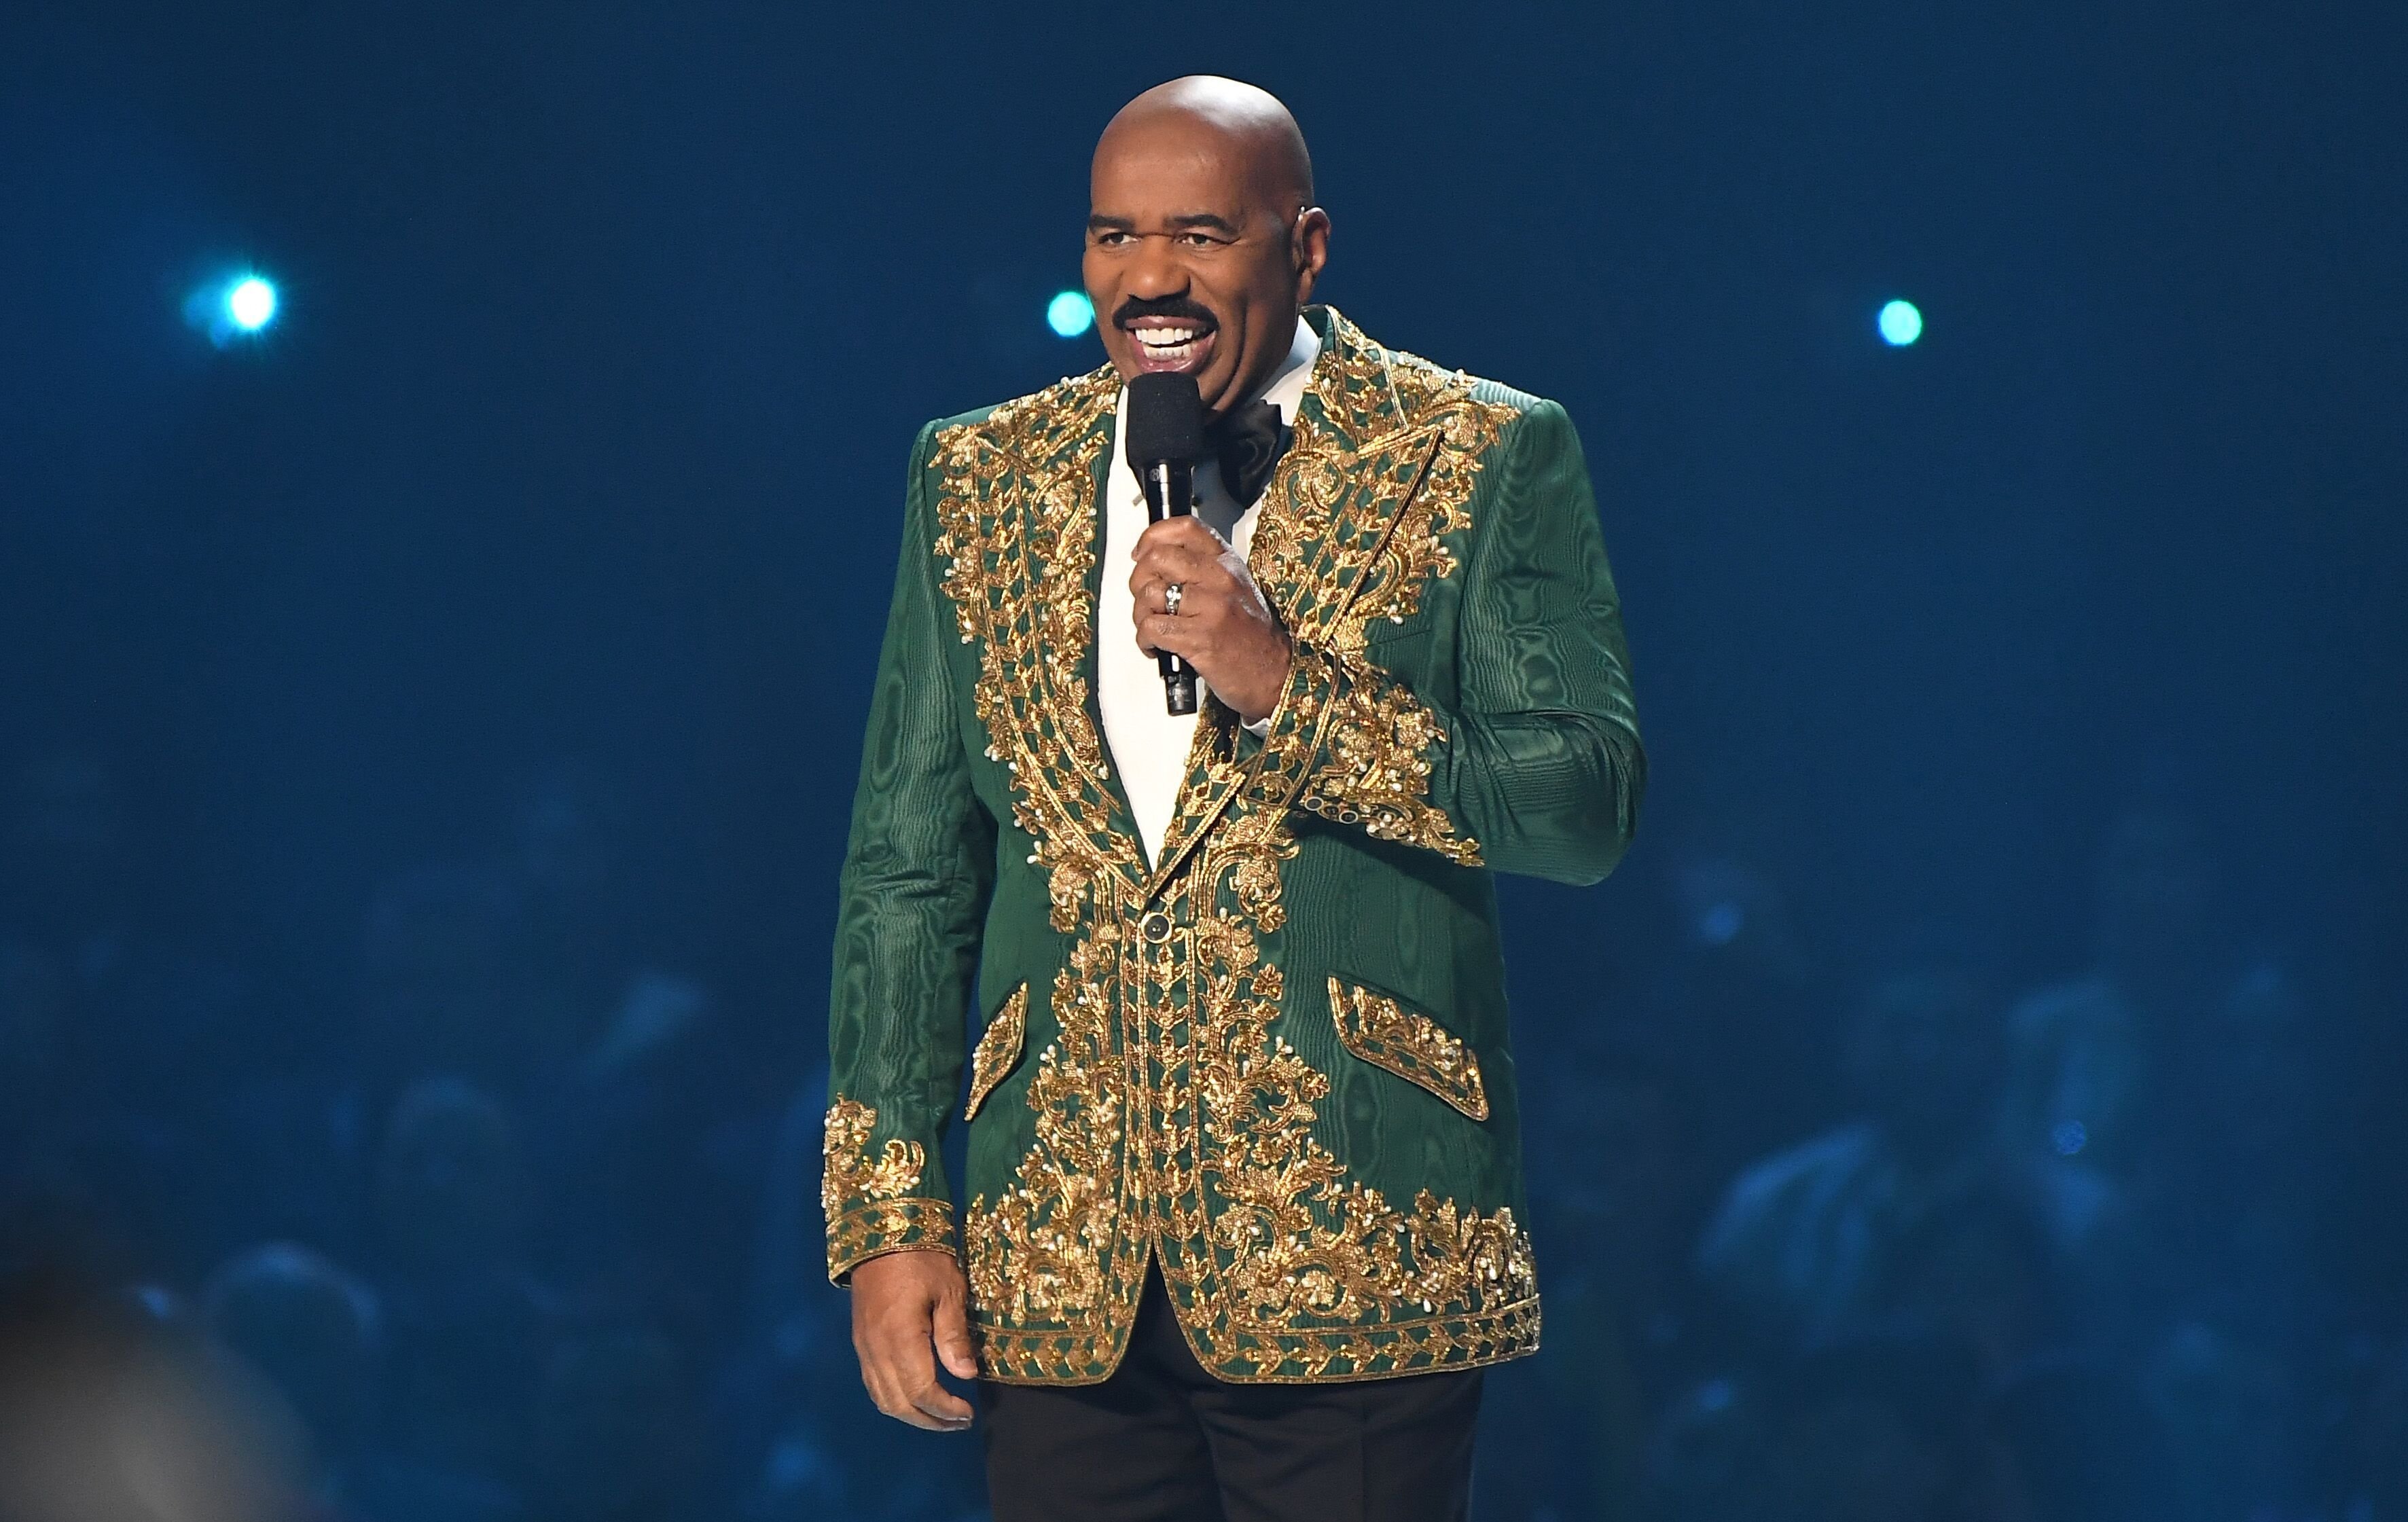 Steve Harvey hosting the 2019 Miss Universe Pageant/ Source: Getty Images